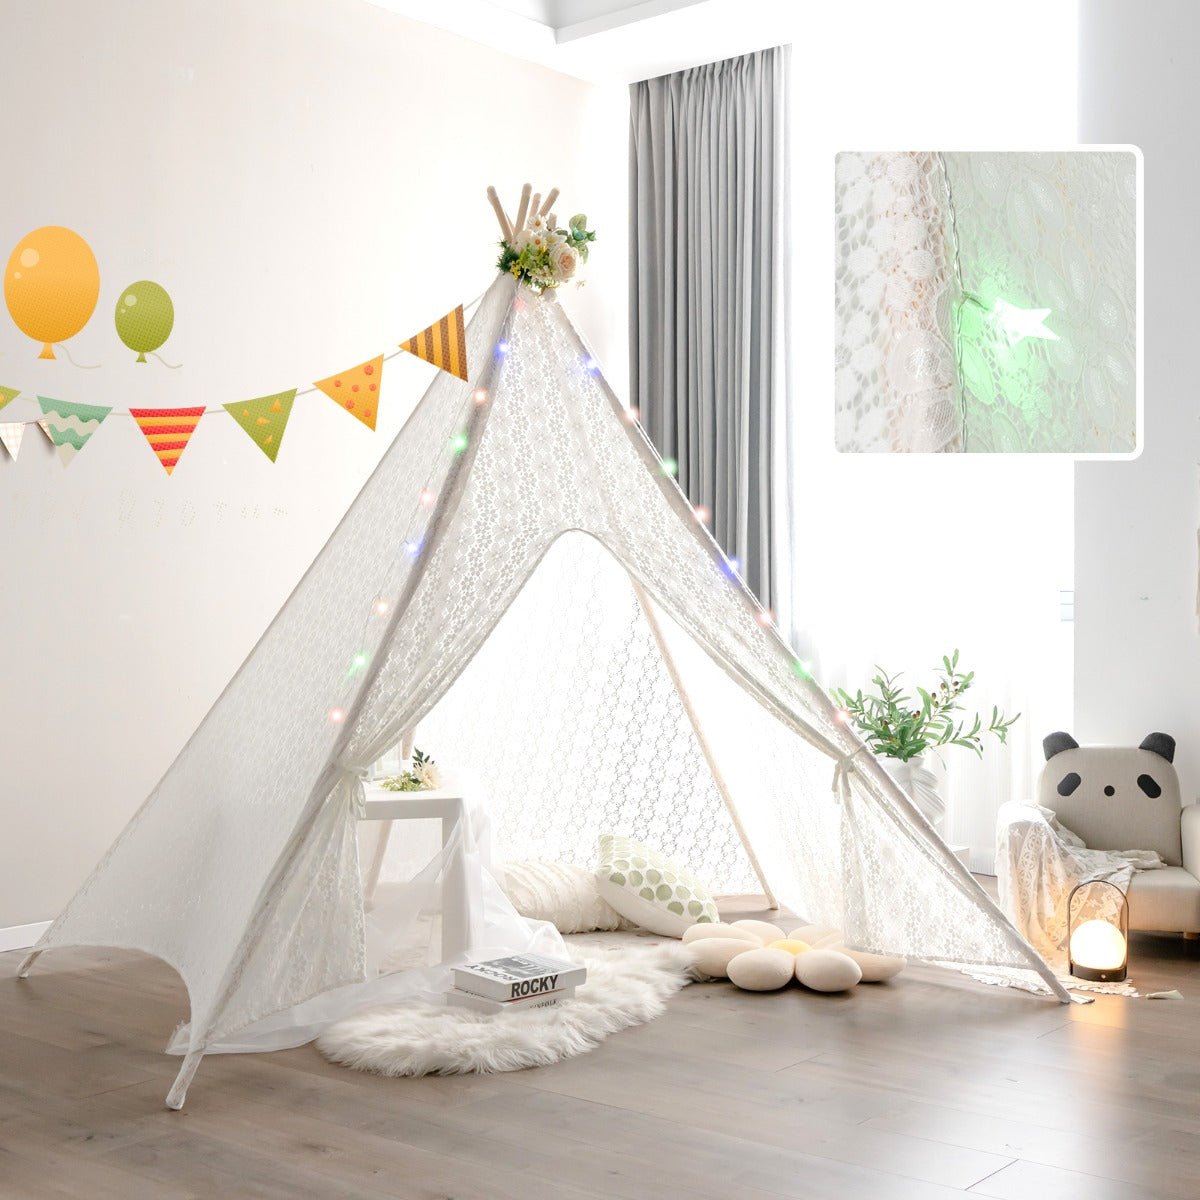 Whimsical 5-Side Lace Teepee with colourful Lights: Perfect for Kids and Adults